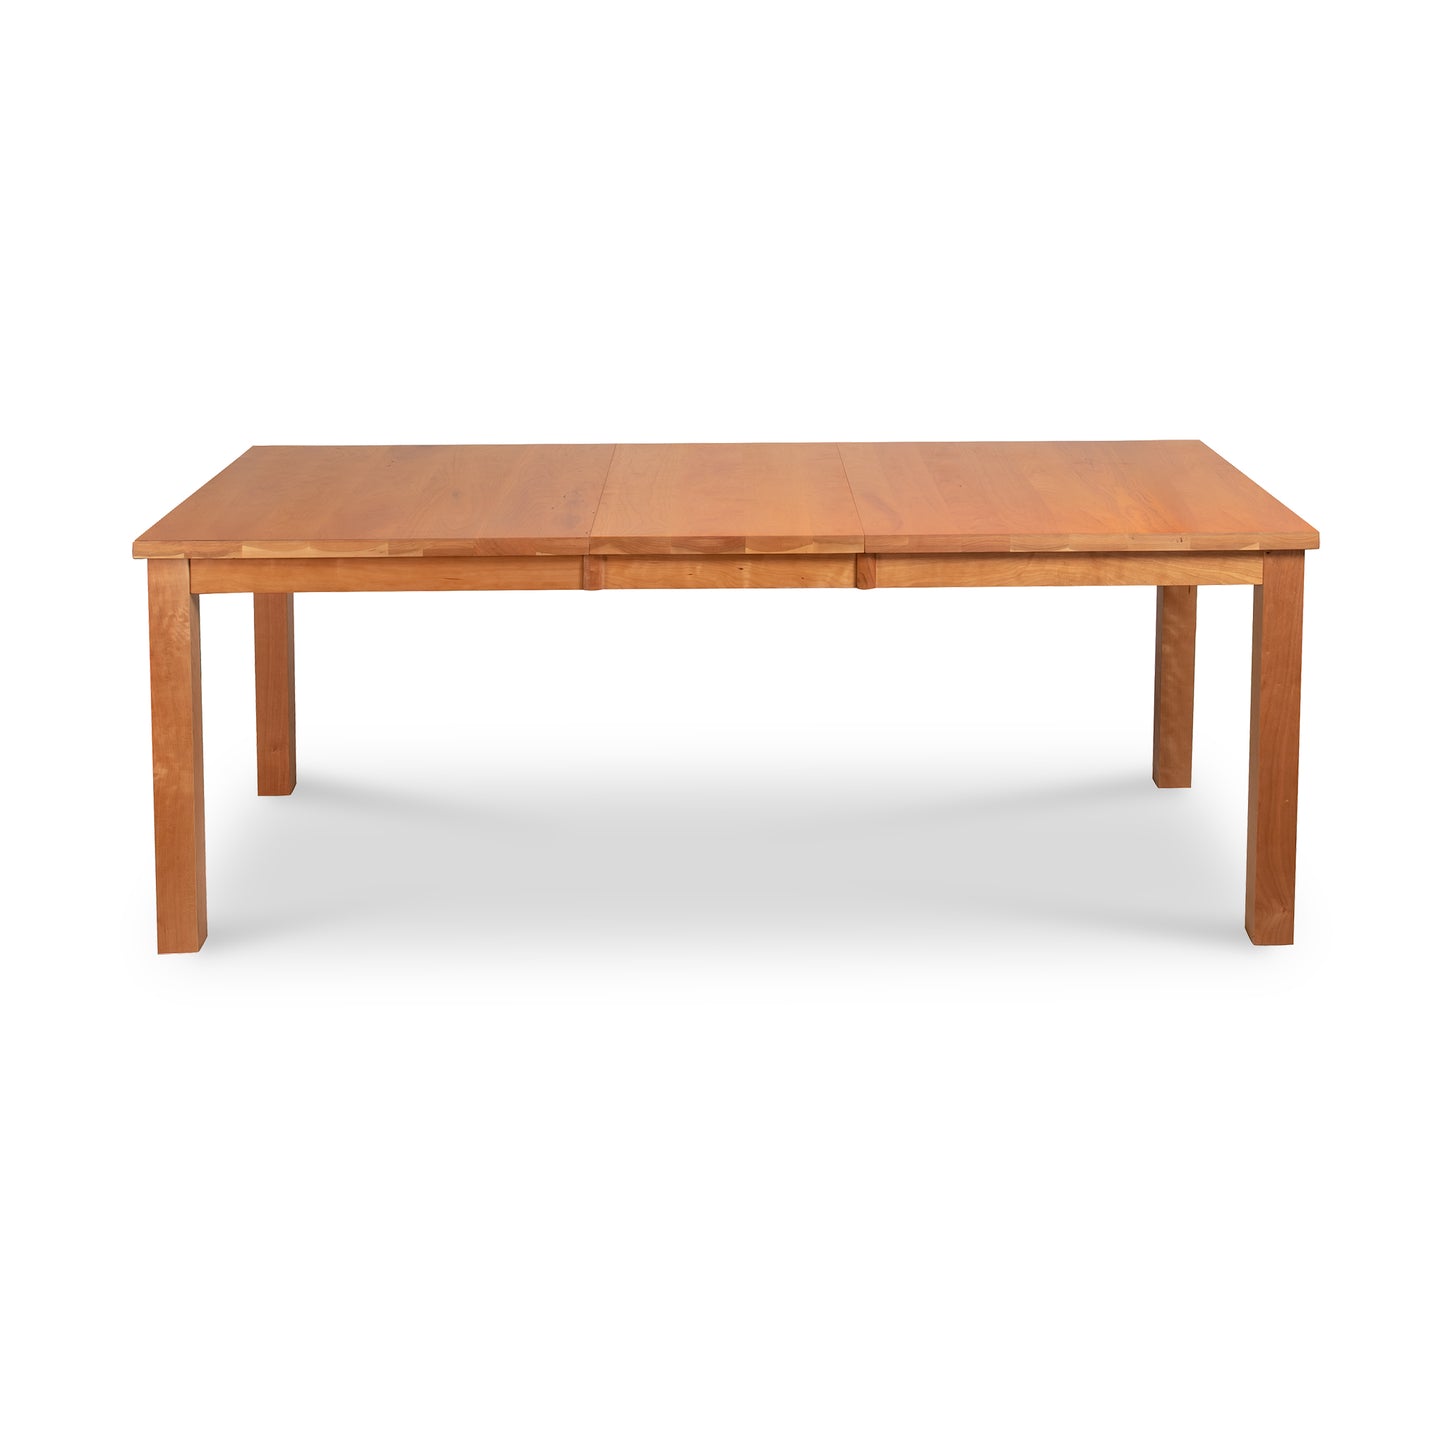 An eco-friendly Modern Mission Parsons Extension Table from Lyndon Furniture on a white background, made from sustainably harvested woods.